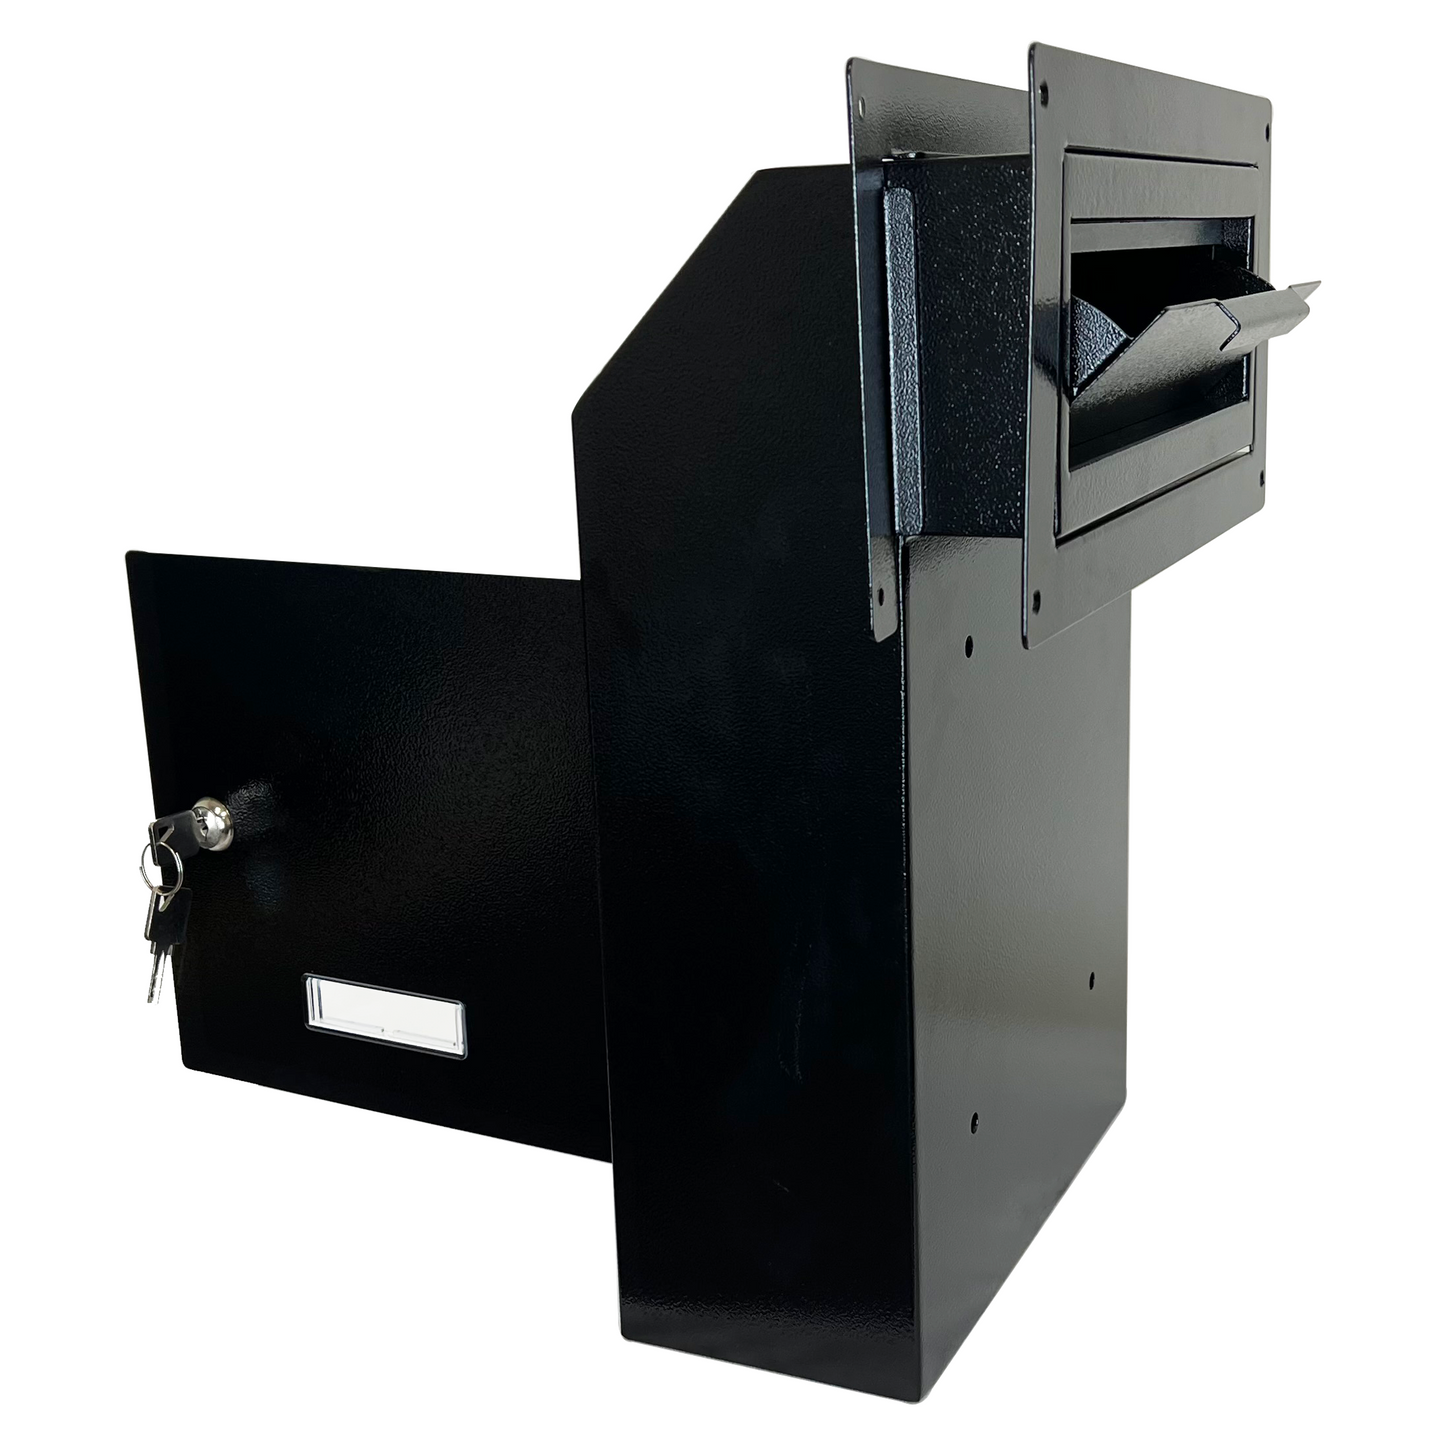 M-D1A-H - Door Drop Box for Mail, Rent, Deposit, and Night Key - Through The Door Locking Steel Mailbox with Rear Access | 9.75” L x 4.25” W x 14.75” H (Black)